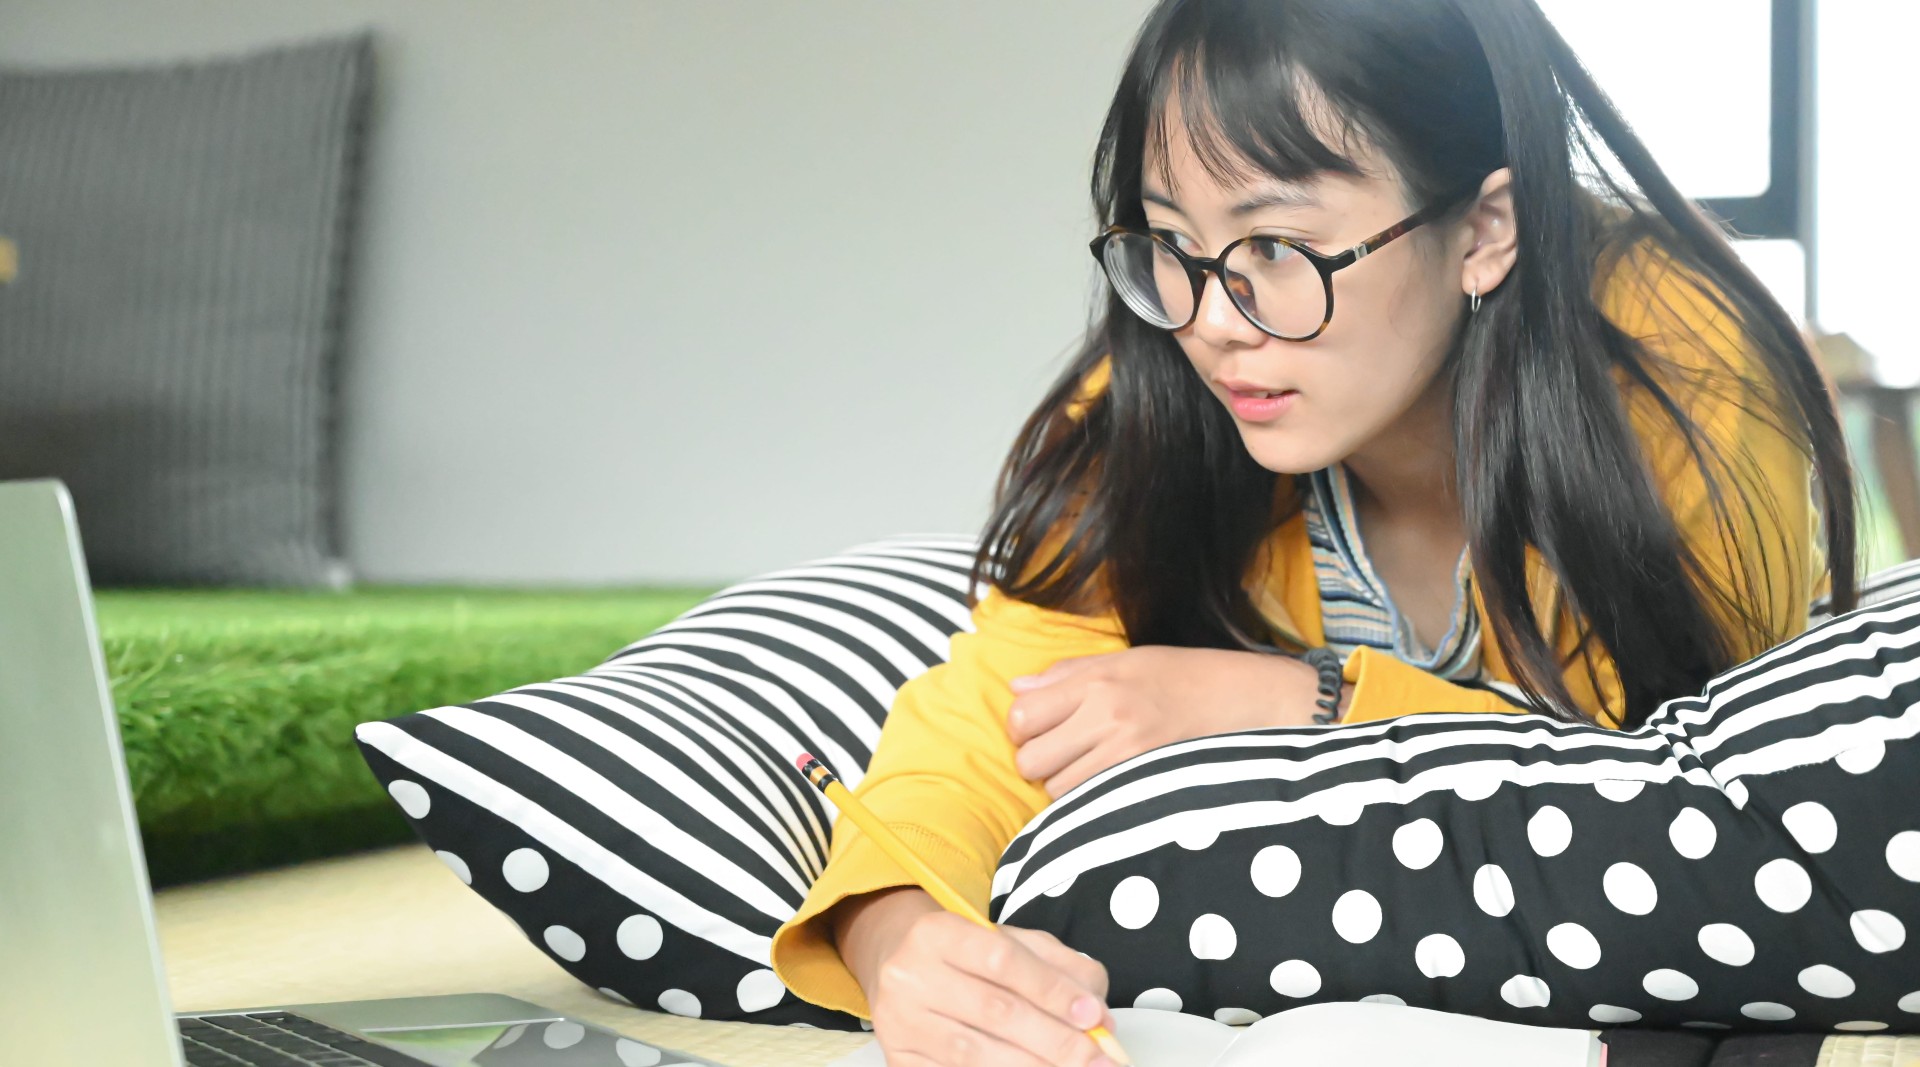 A young Asian woman with glasses is in a yellow sweater and is laying on her stomach on a black and white striped and polka dot pillow, as she works on her computer